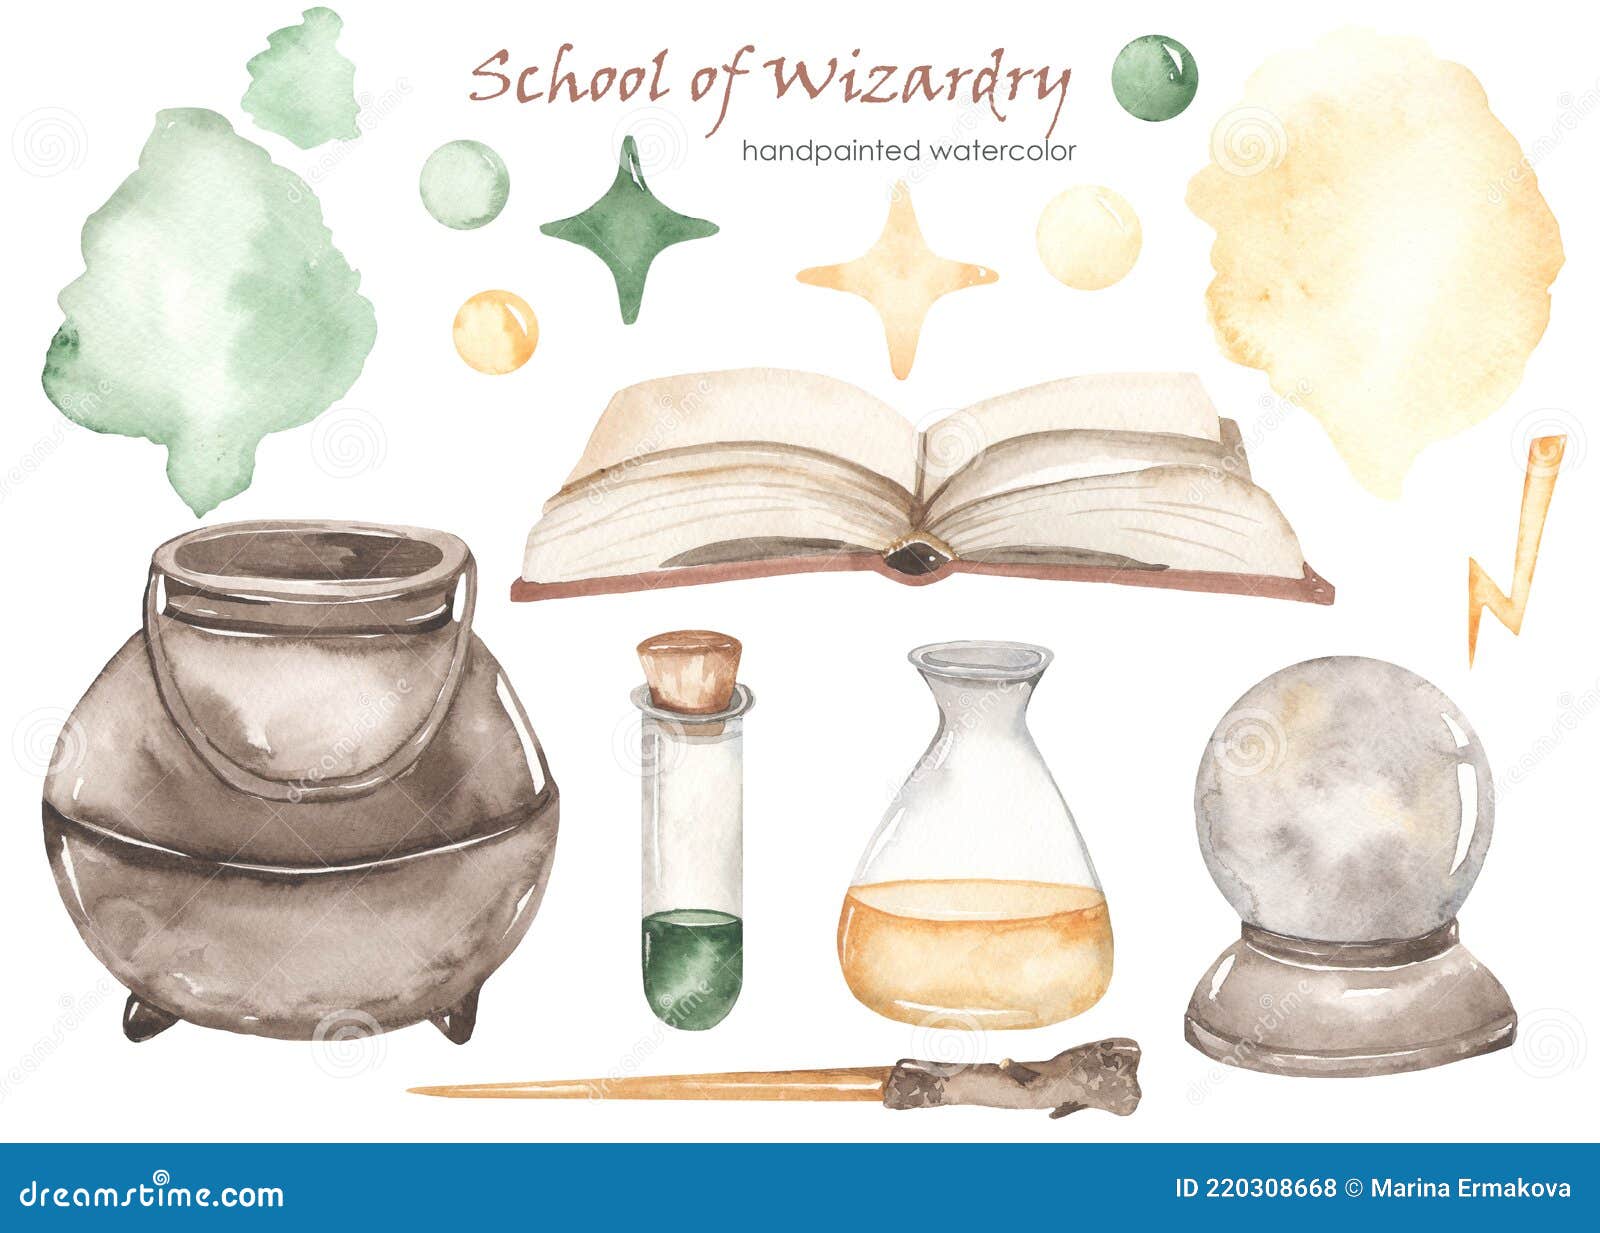 watercolor set school of wizardry with potion, cauldron, book of magic, magic wand, elixirs, crystal ball